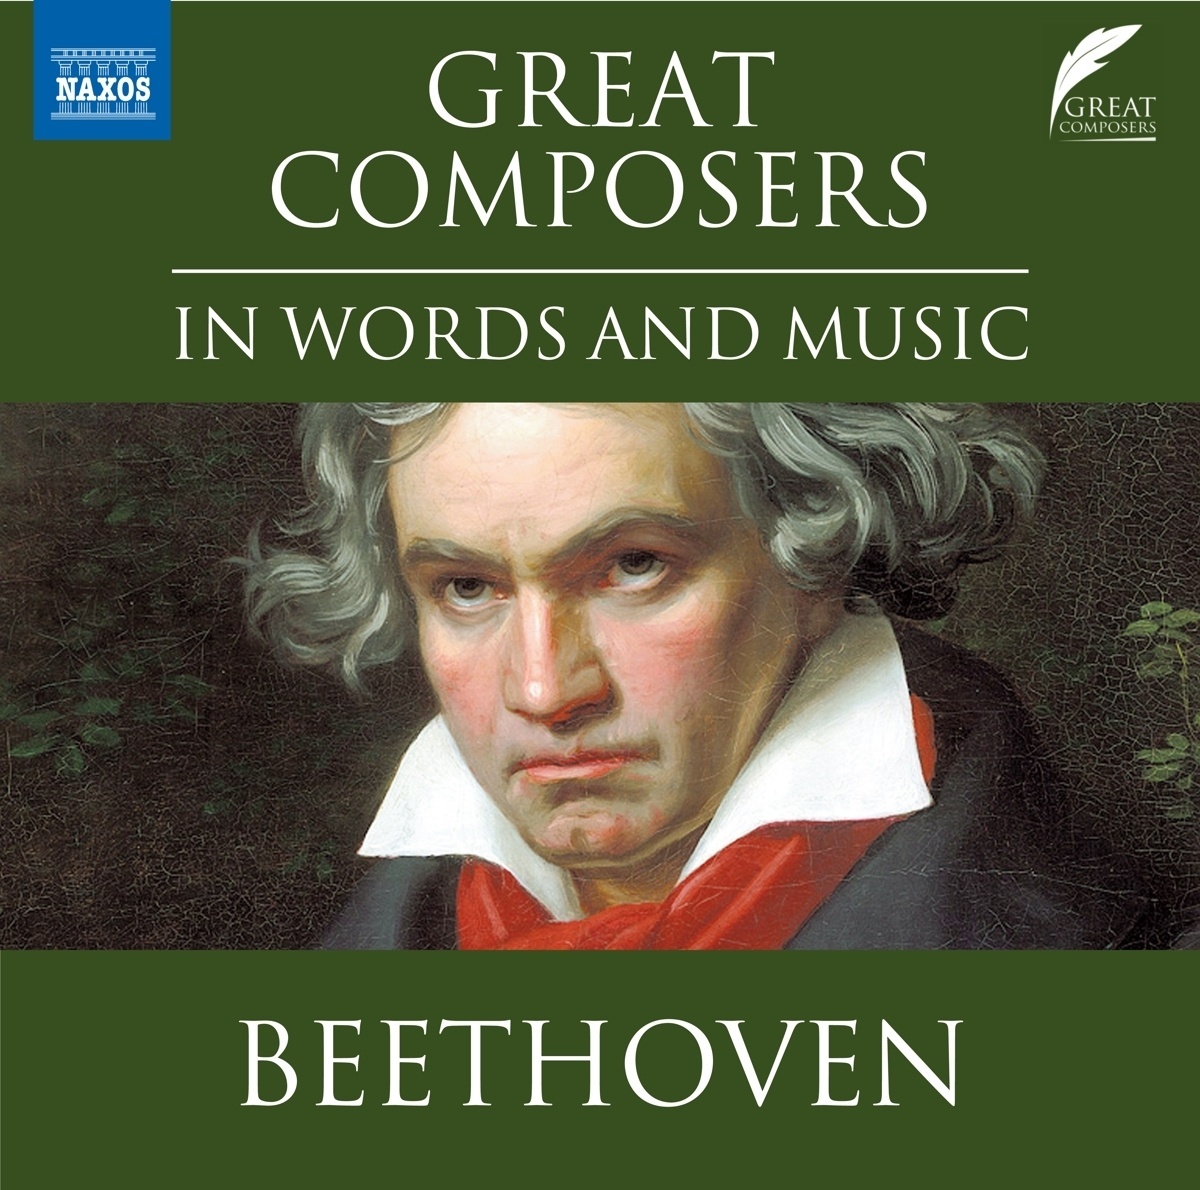 Great Composers-Beethoven - Leighton Pugh (Hörbuch)